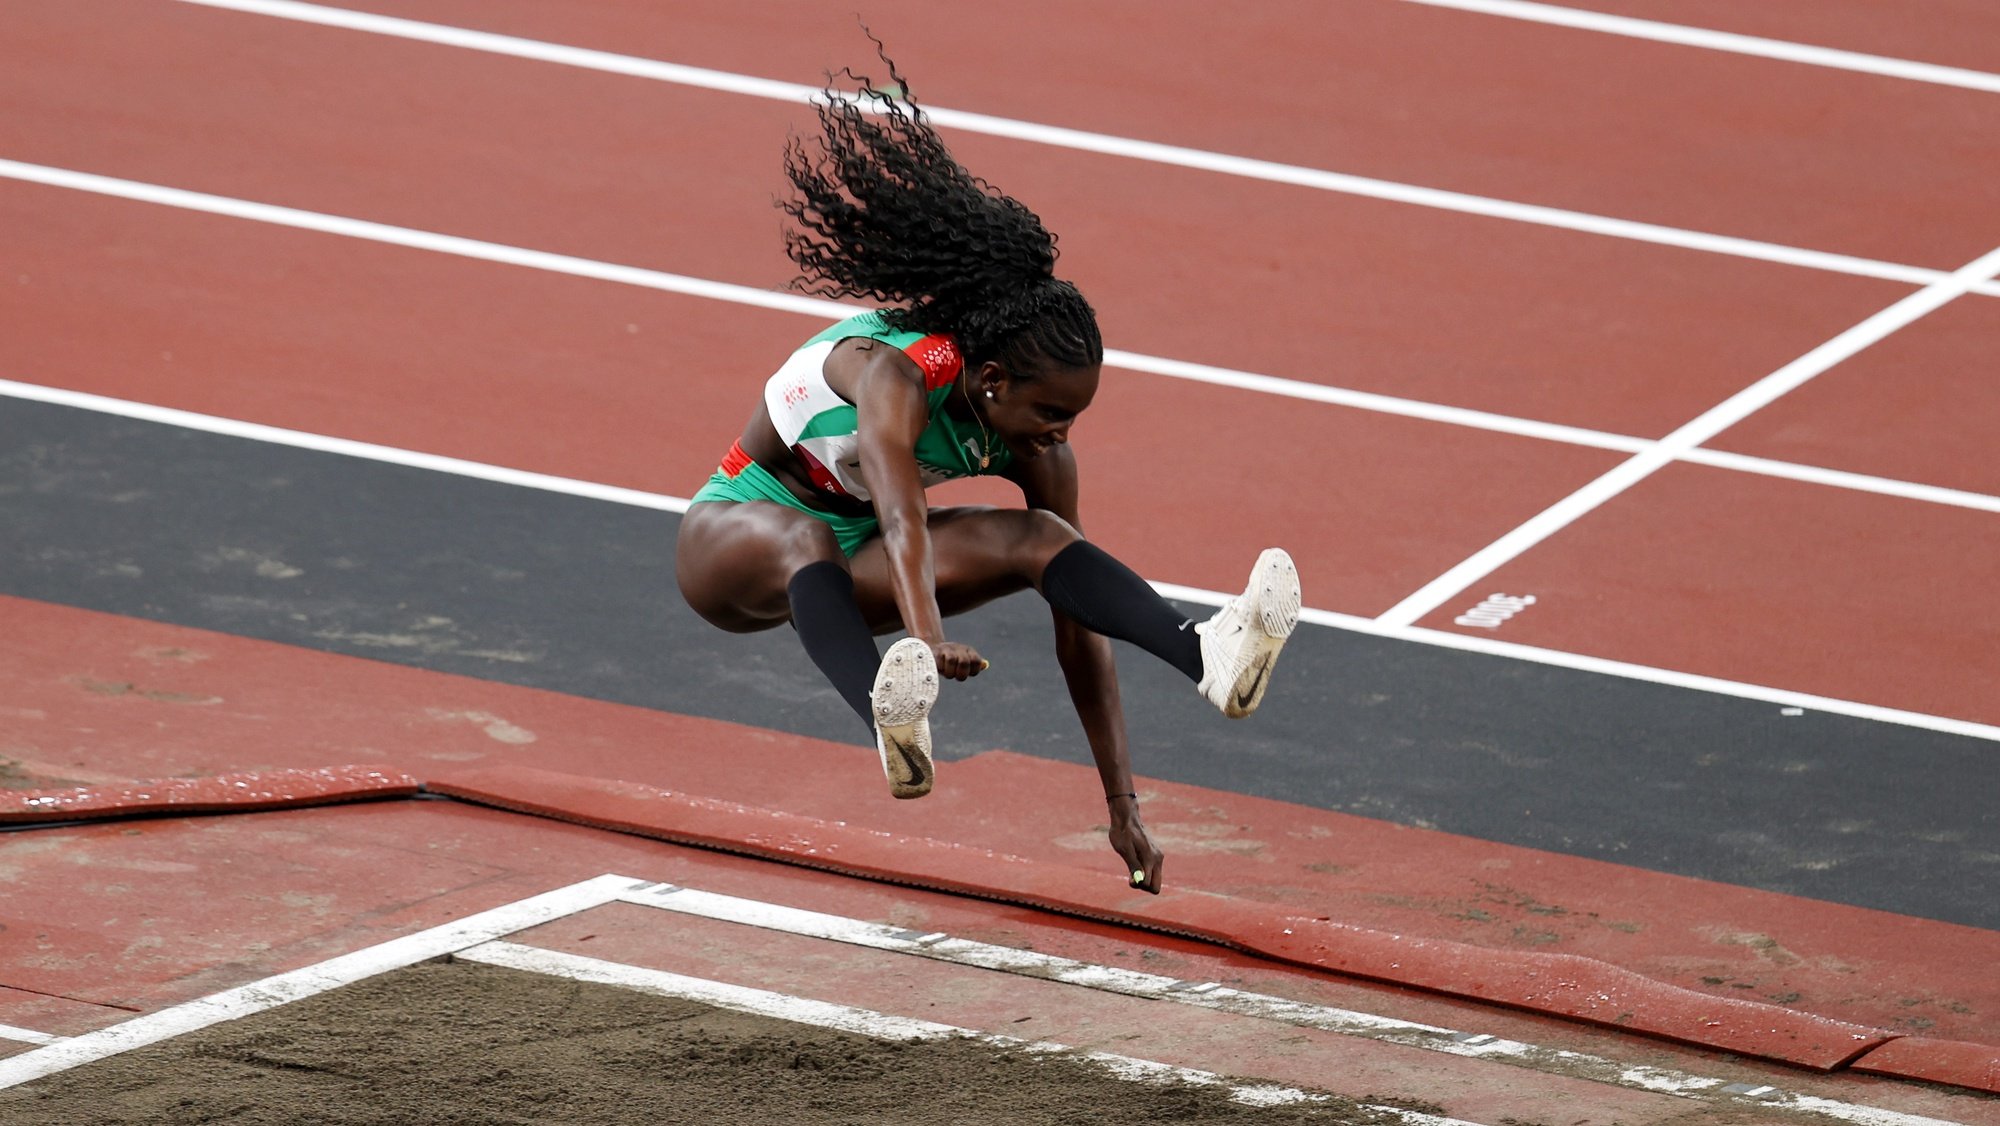 epa09379817 Evelise Veiga of Portugal competes in the Women&#039;s Triple Jump Qualification - Group A during the Athletics events of the Tokyo 2020 Olympic Games at the Olympic Stadium in Tokyo, Japan, 30 July 2021.  EPA/JEON HEON-KYUN